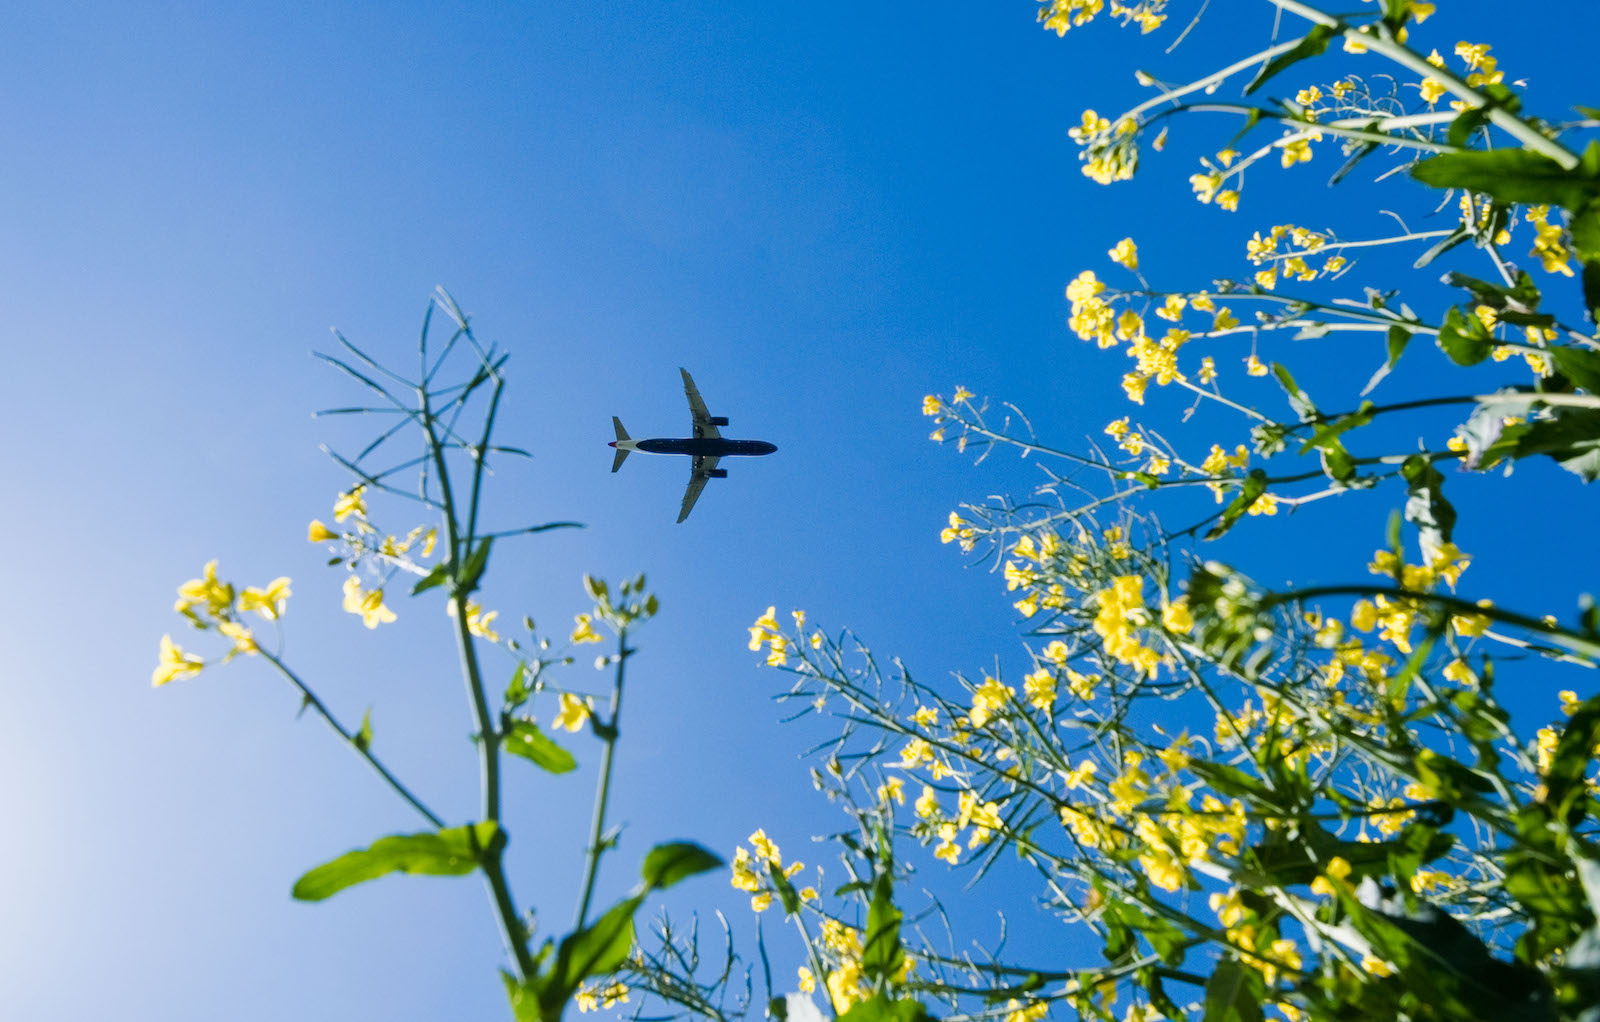 A passenger plane approaching Hannover Airport flies over a canola field.